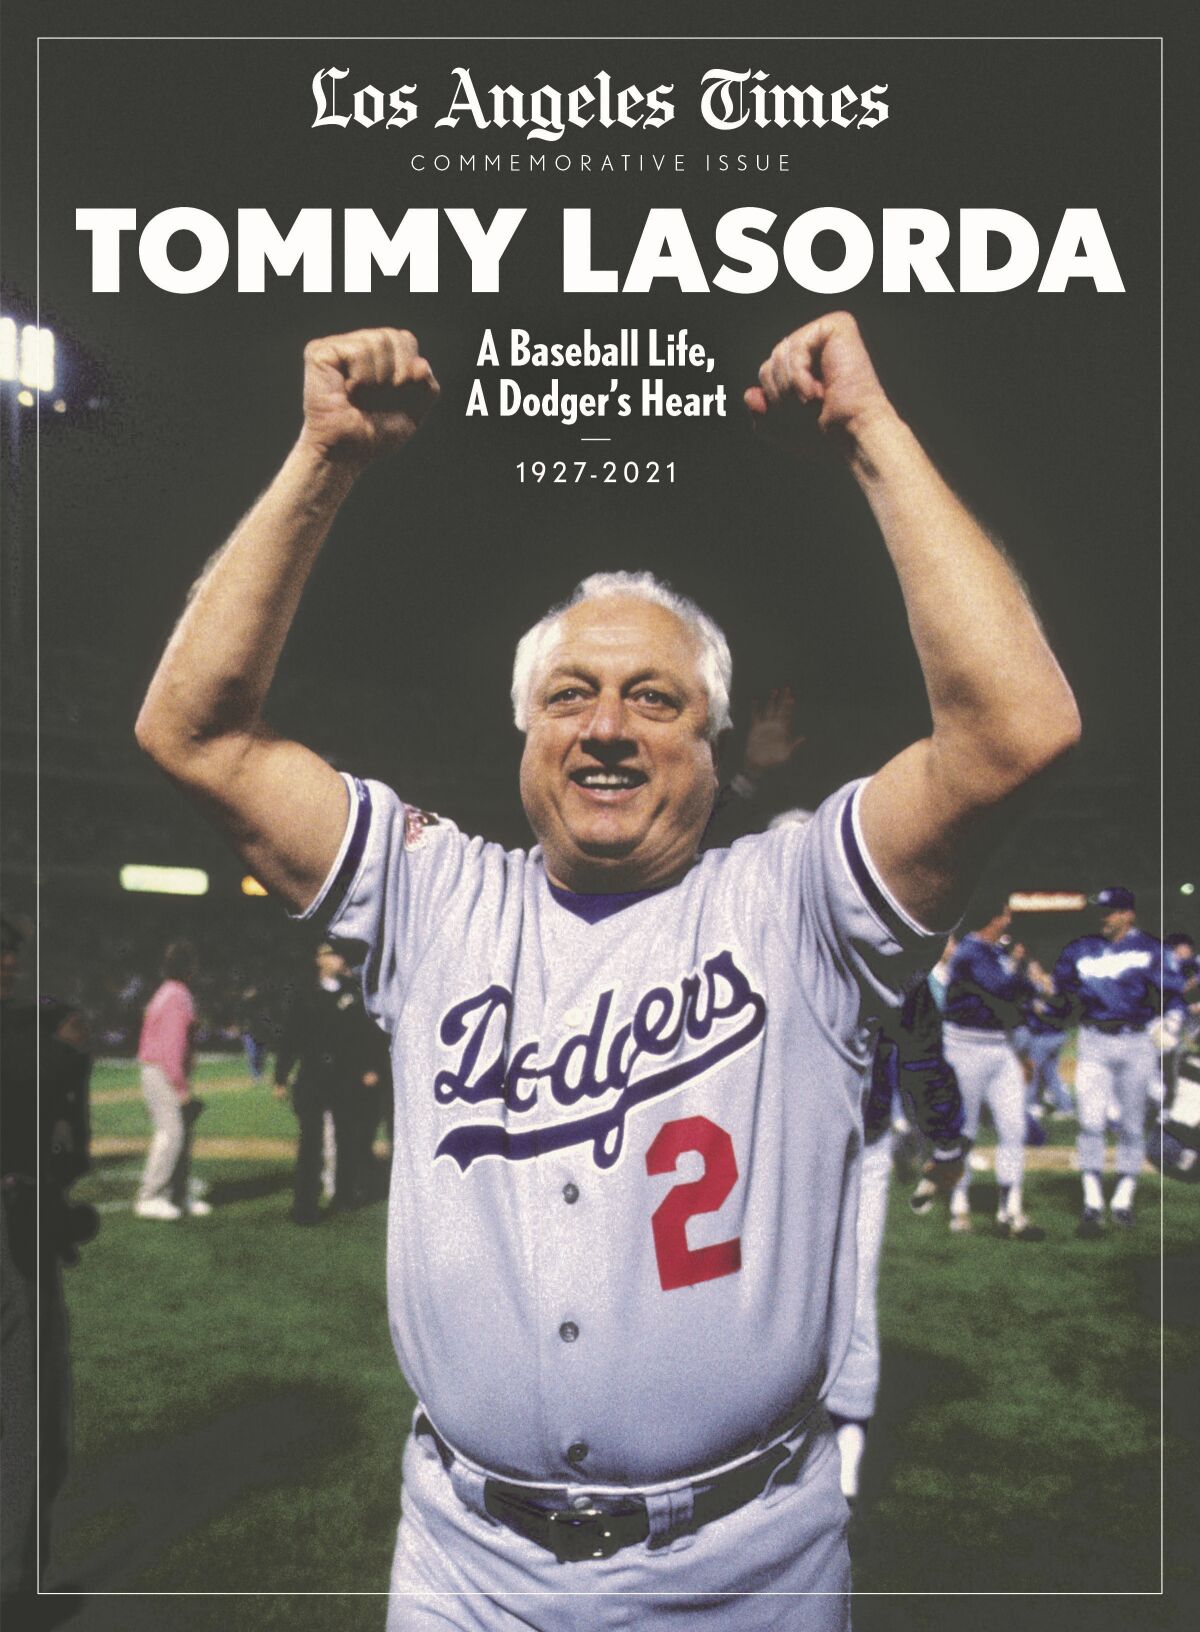 "Tommy Lasorda: A Baseball Life, a Dodger’s Heart” magazine, a Los Angeles Times special edition 